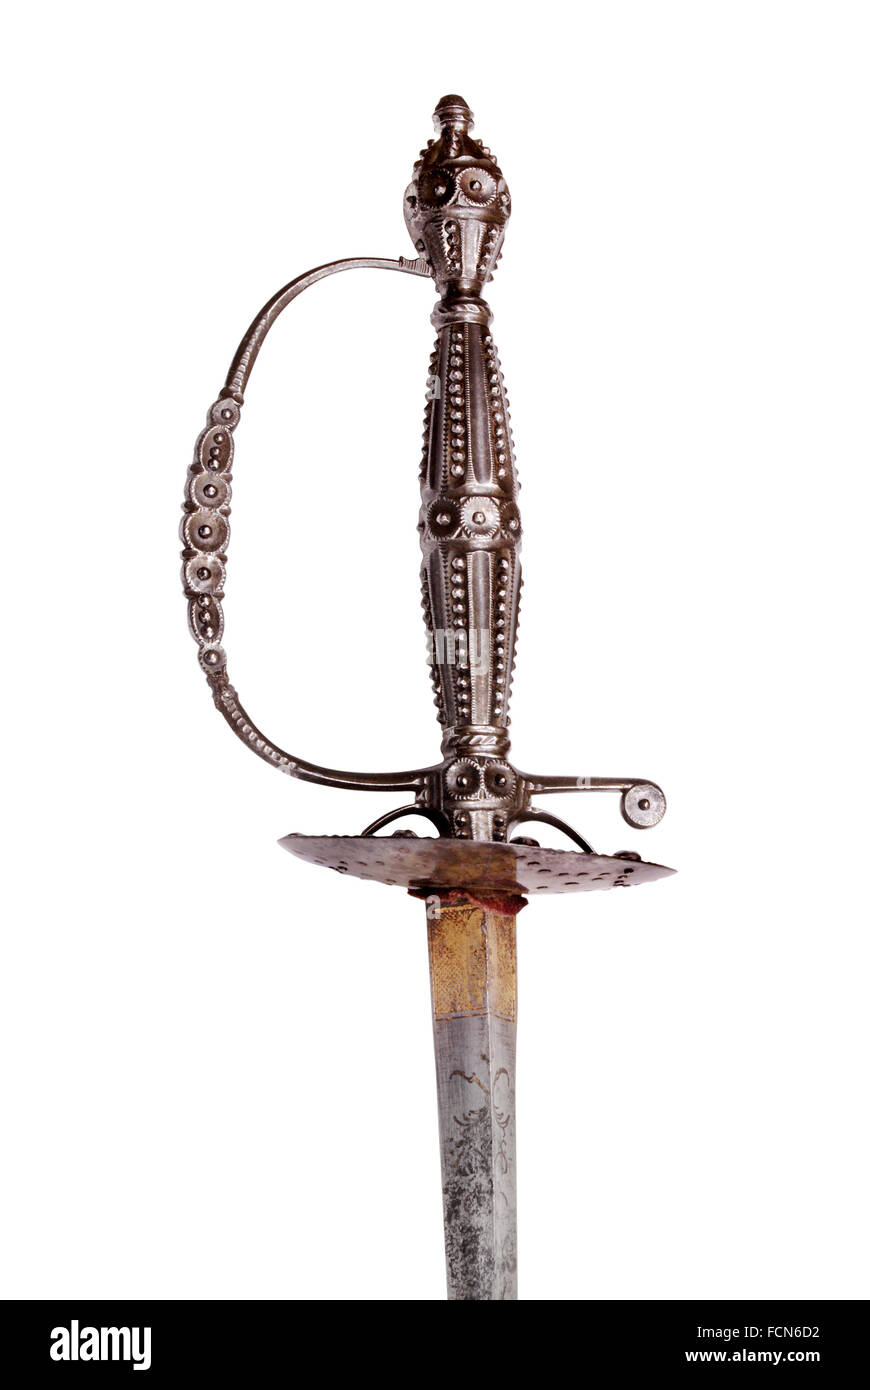 Sword (rapier) of French noble. France, 18th century. Path on the white background. Stock Photo